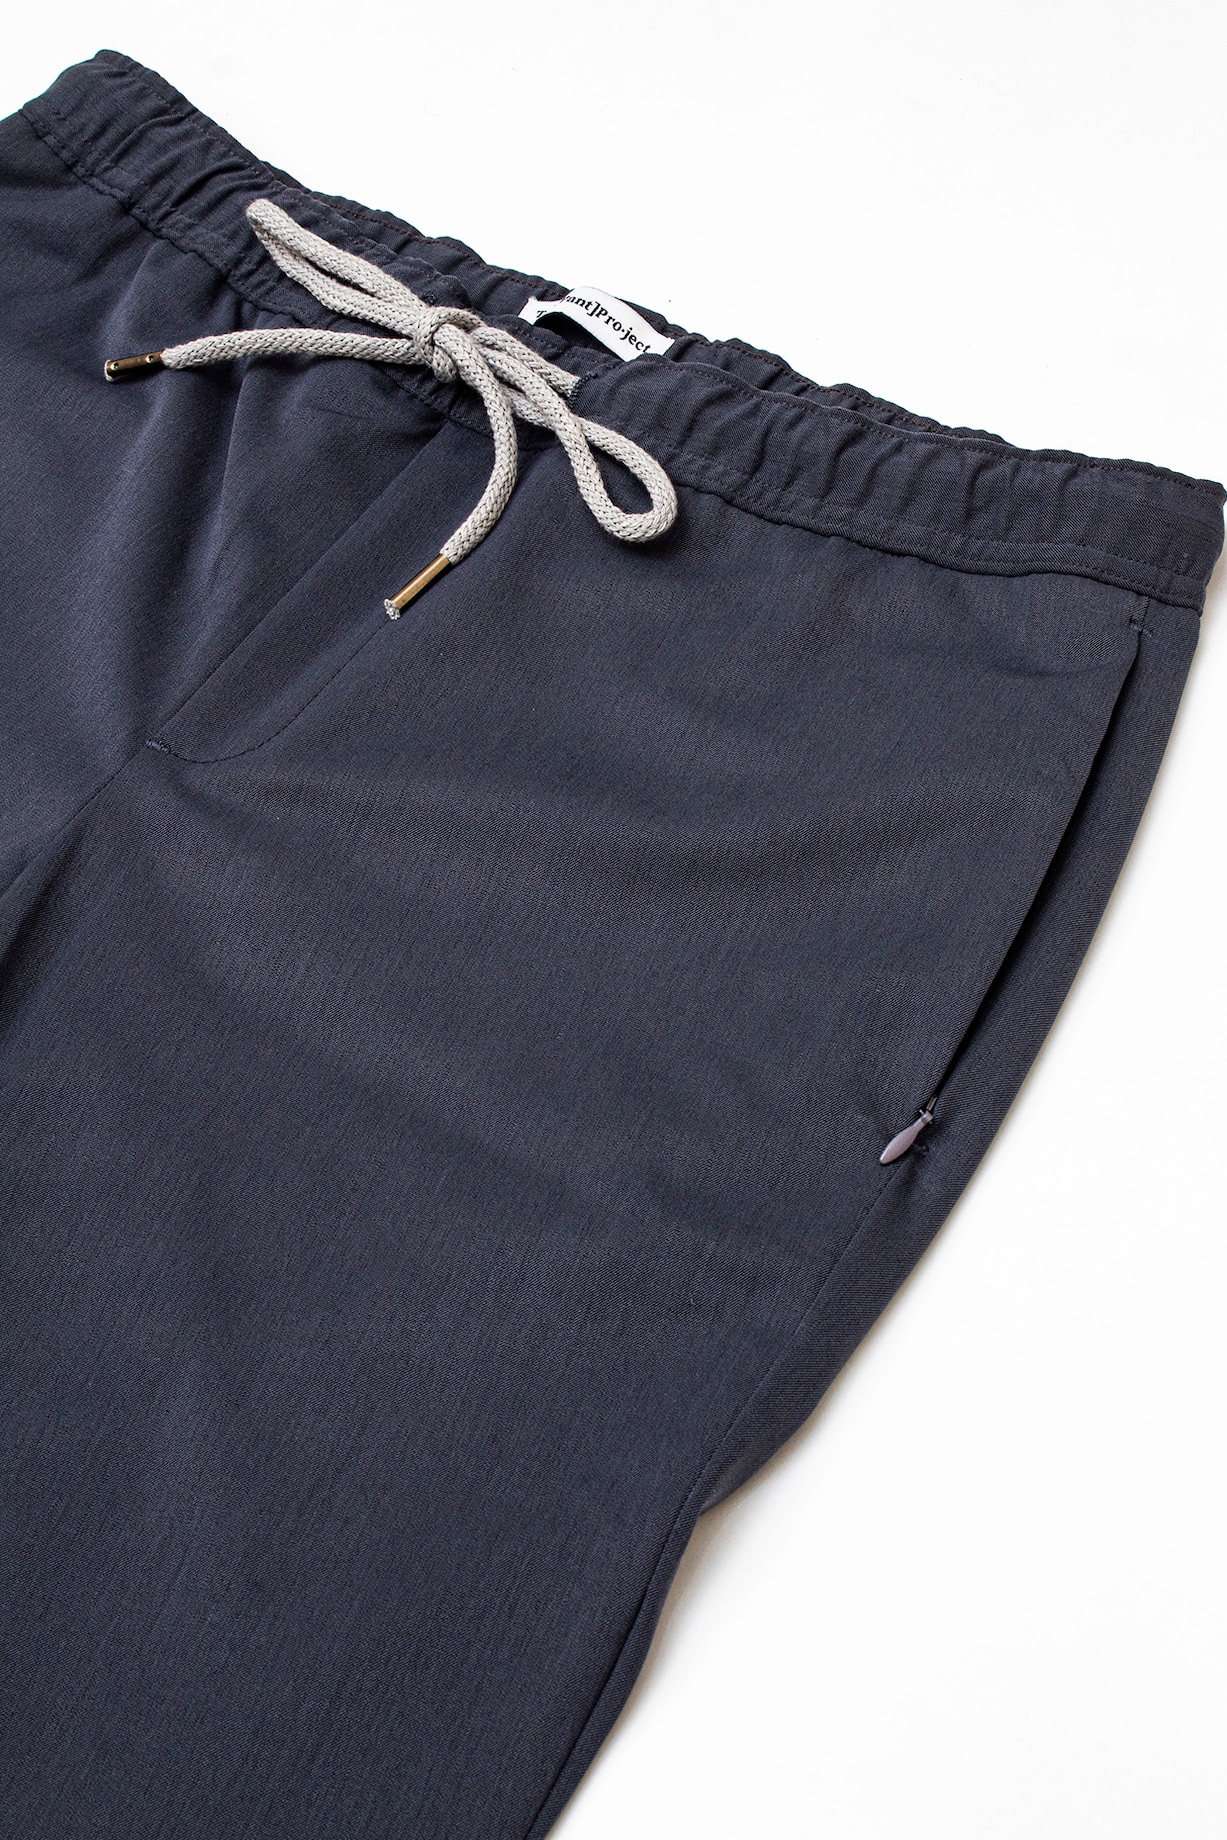 Grey All Weather Essential Stretch Joggers (Slim Fit) by THE PANT PROJECT